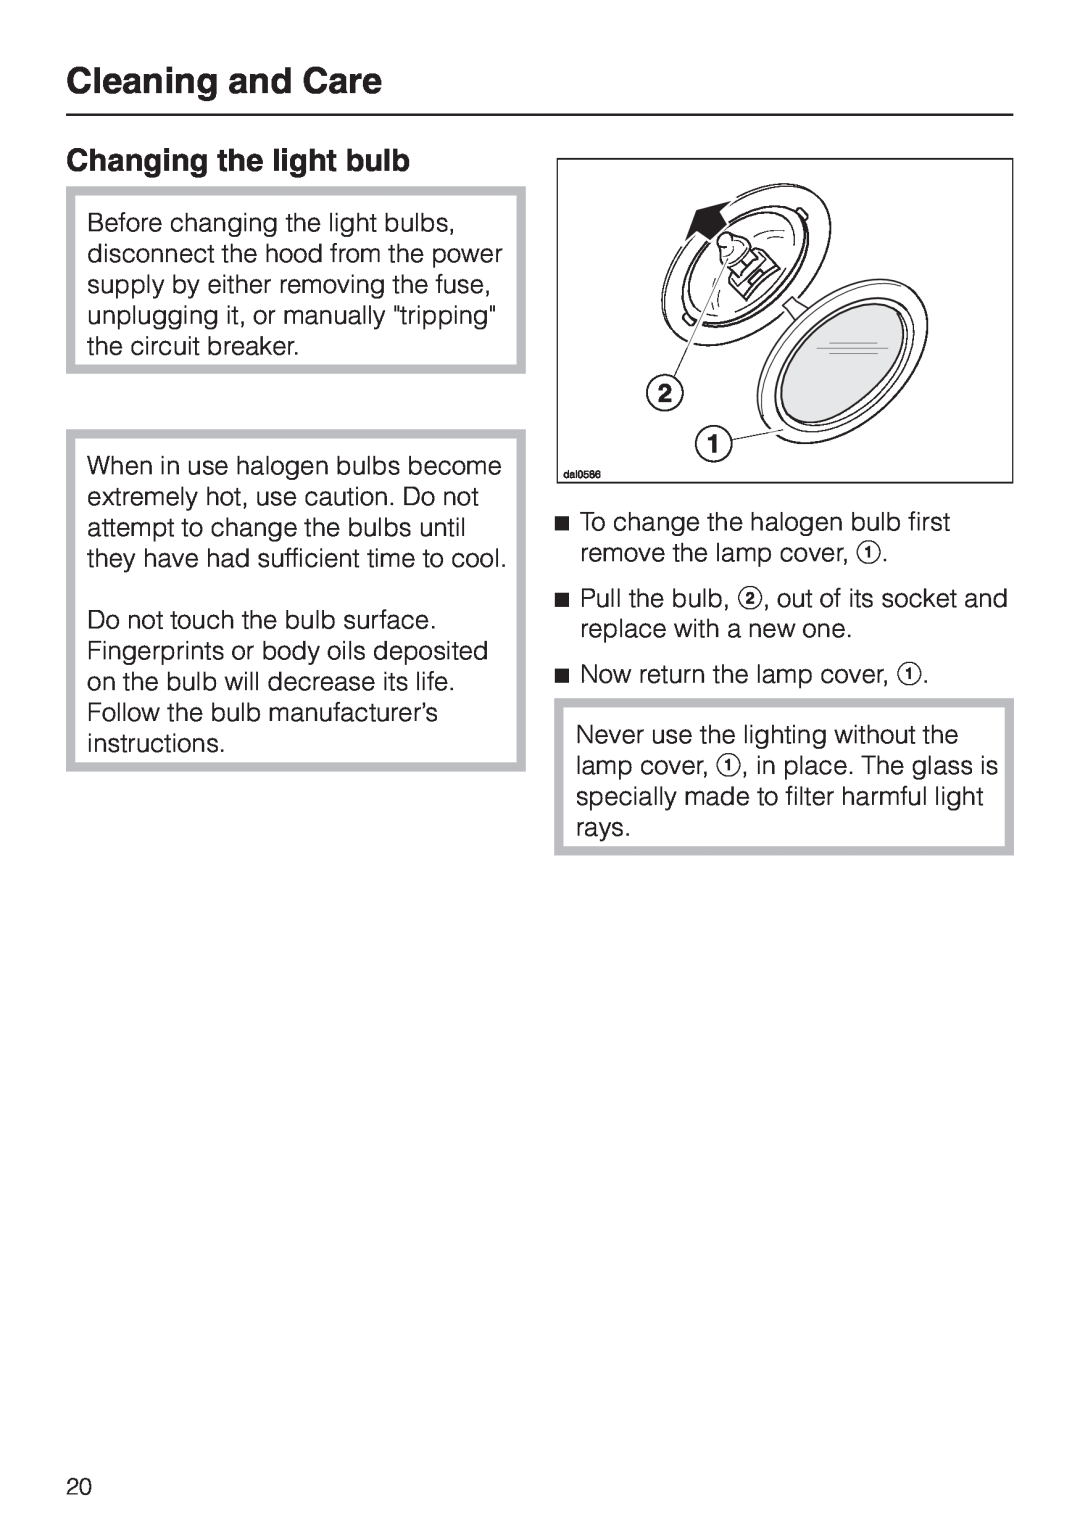 Miele DA 279-4 installation instructions Changing the light bulb, Cleaning and Care 